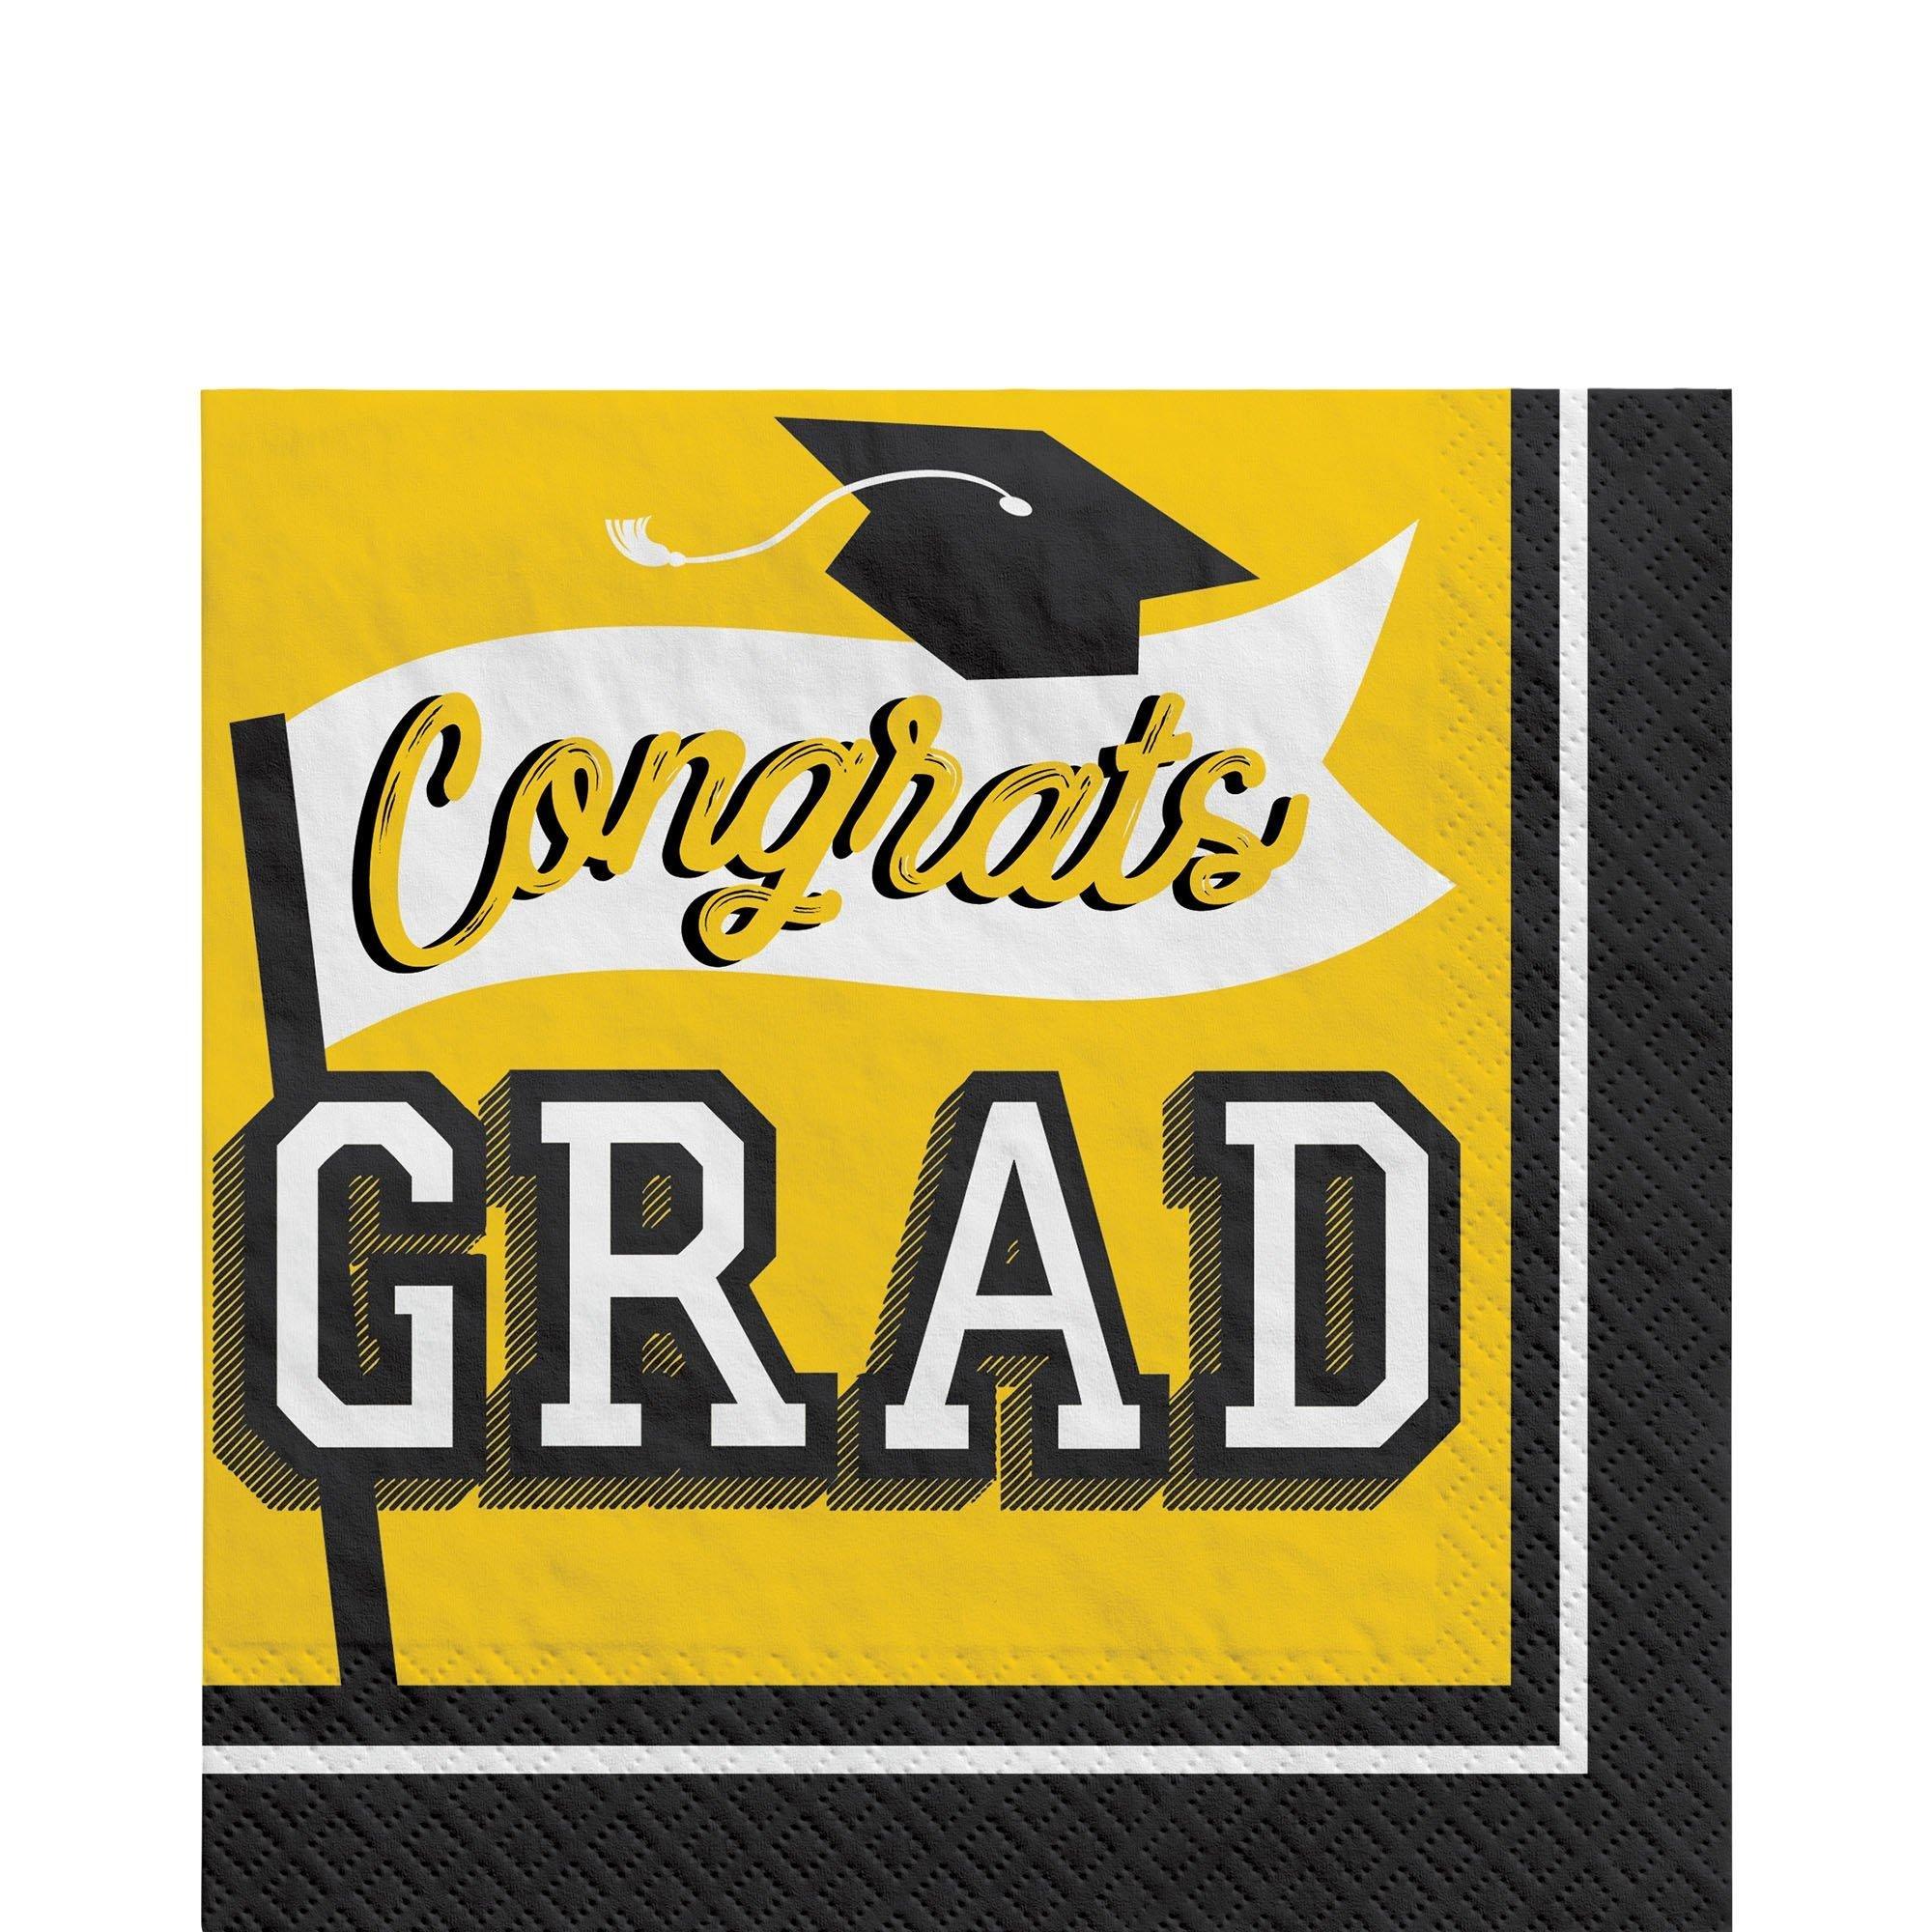 Graduation Party Supplies Kit for 20 with Decorations, Plates, Napkins, Cups - Yellow Congrats Grad